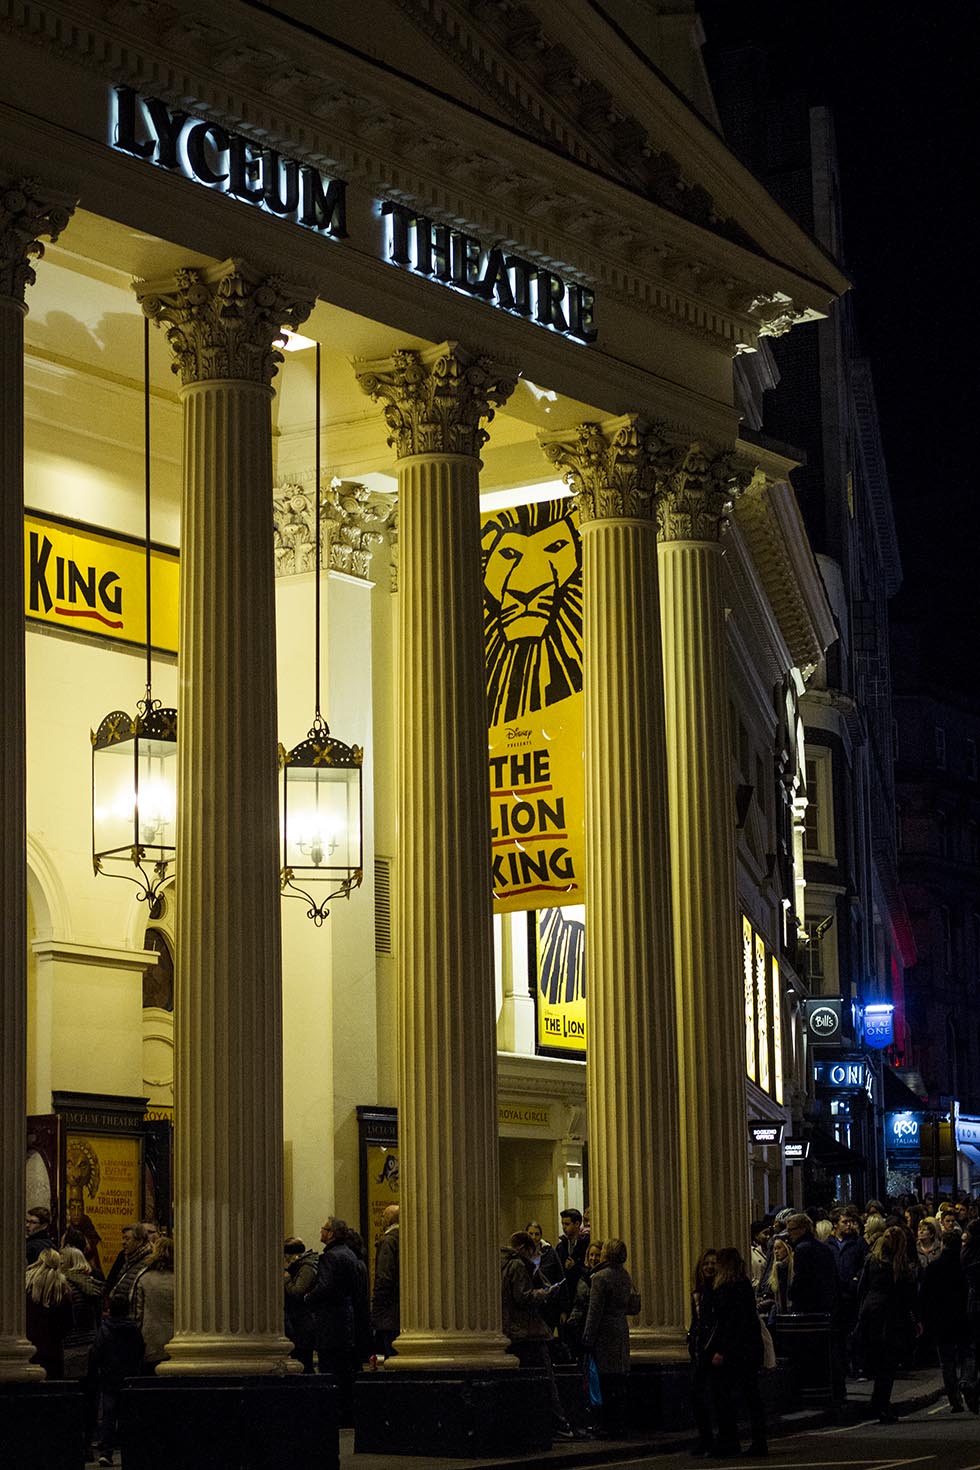 lyceum theatre the lion king london IMG_0464